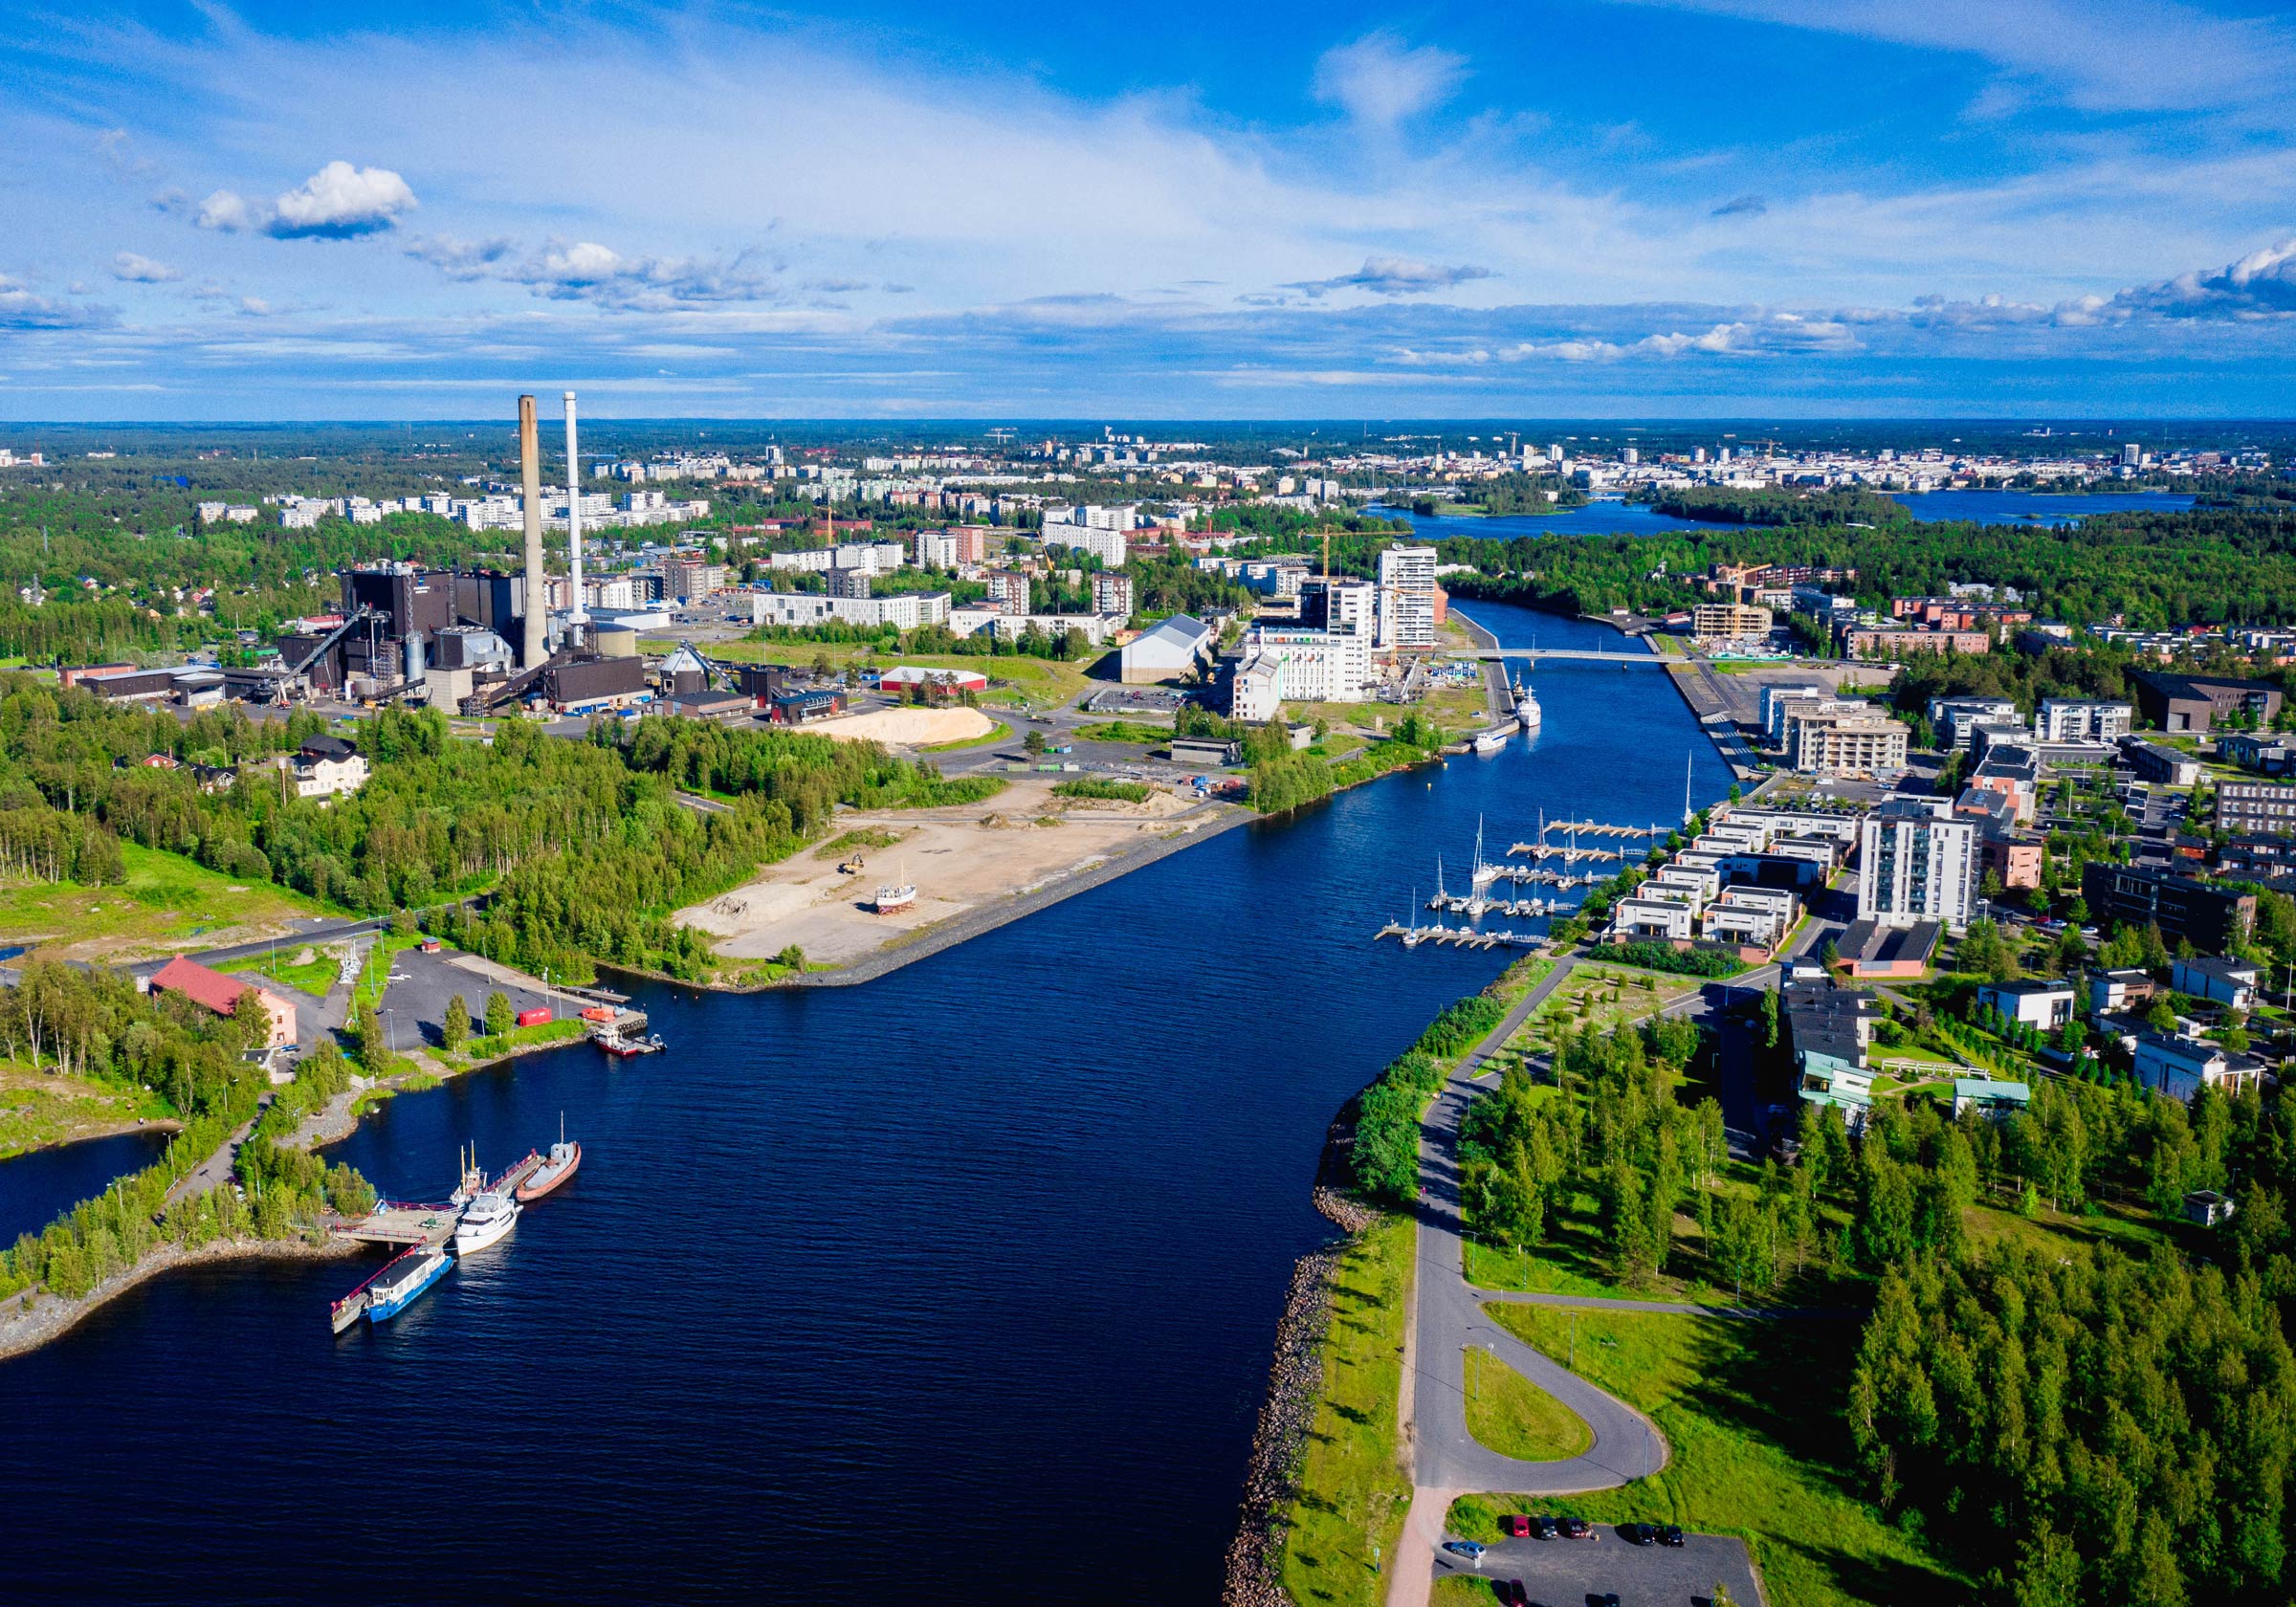 An aerial view of the city of Oulu in Finland